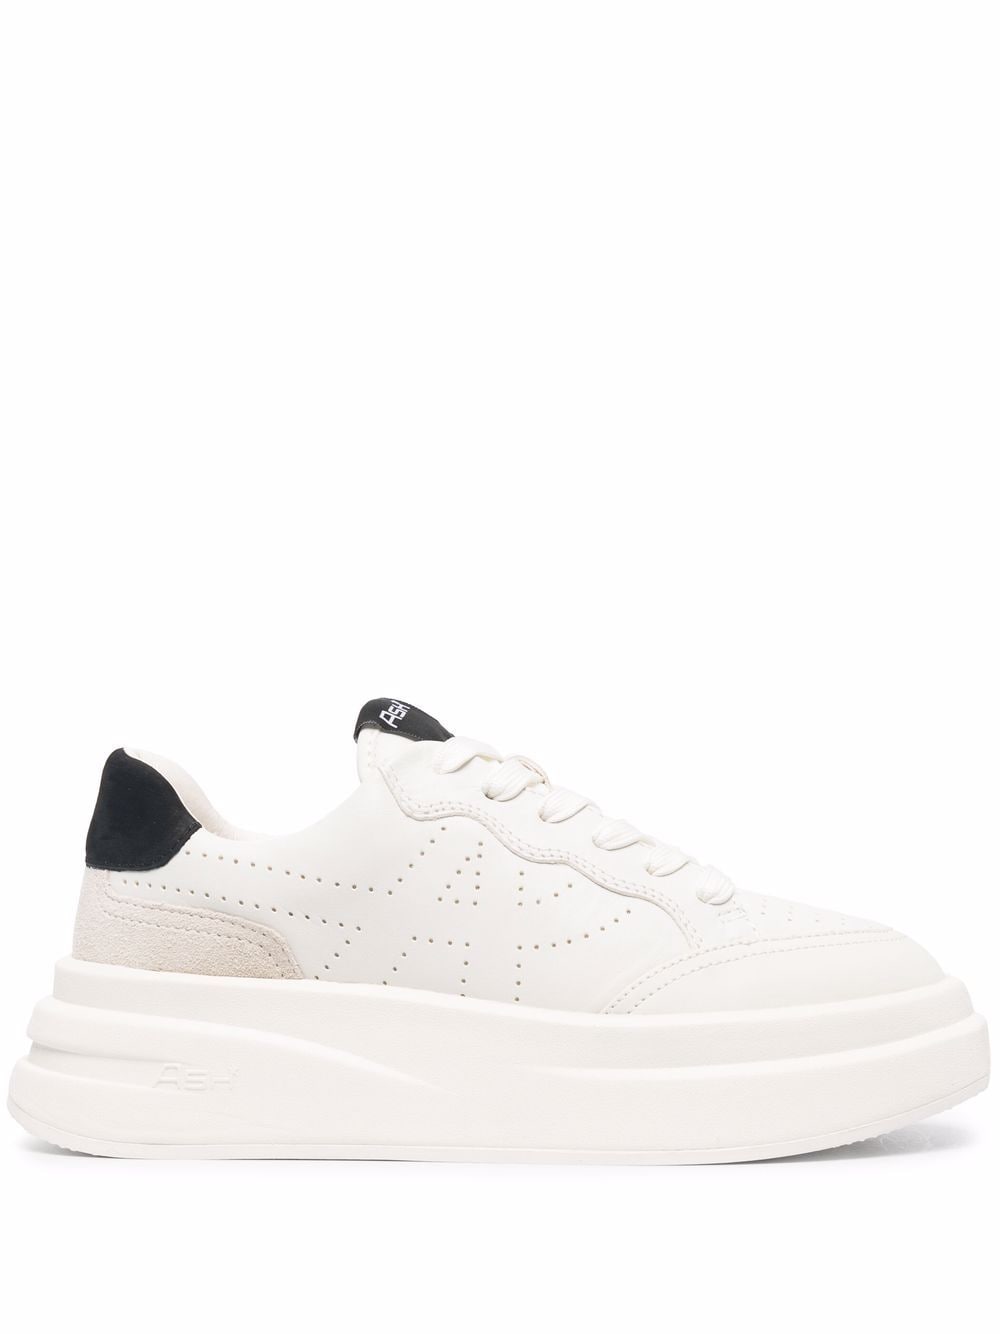 Talc white/black leather panelled lace-up sneakers